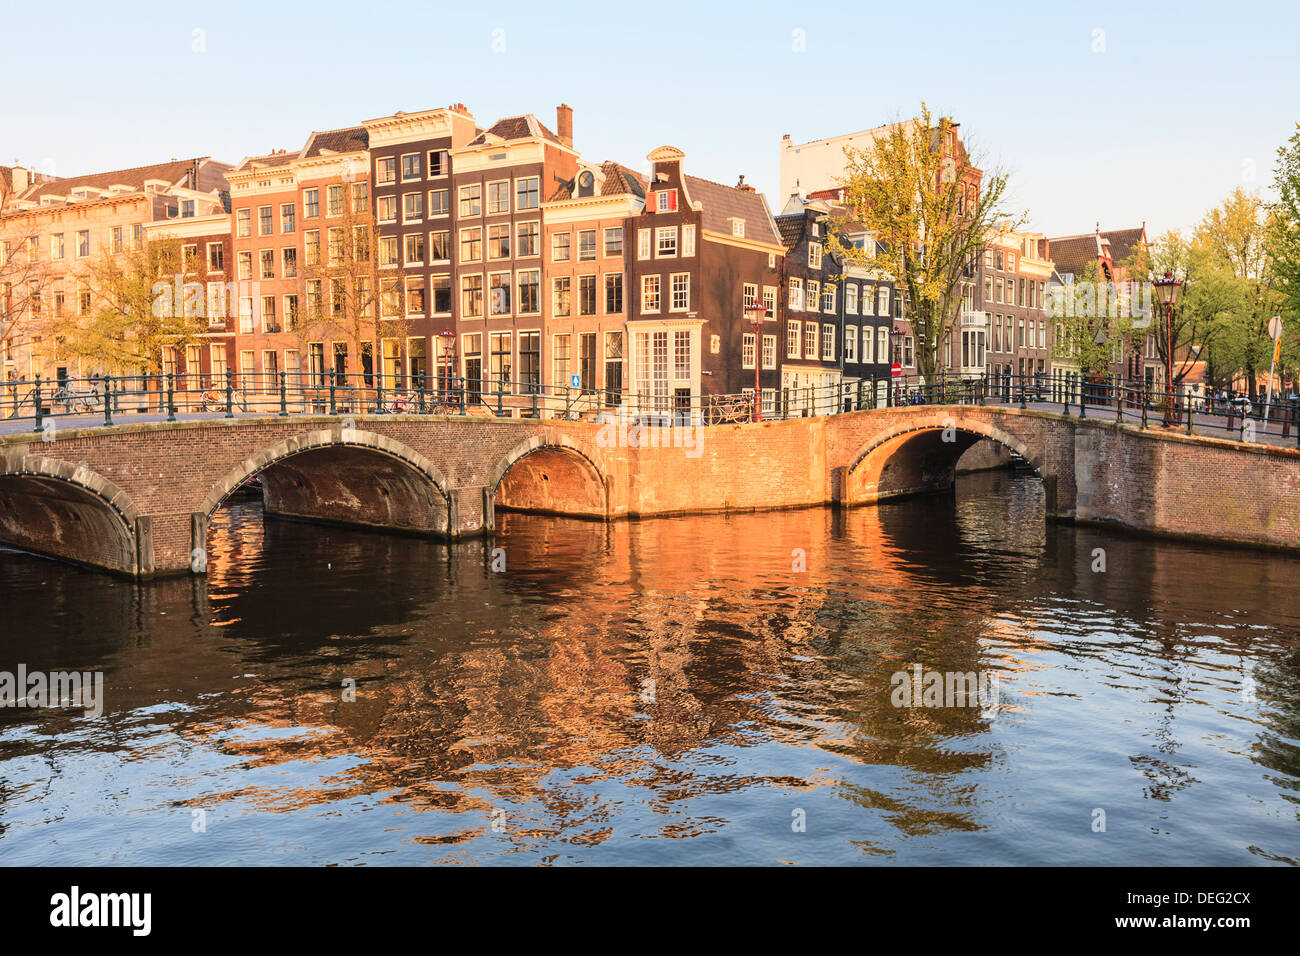 Canal Keizersgracht, Amsterdam, Pays-Bas, Europe Banque D'Images